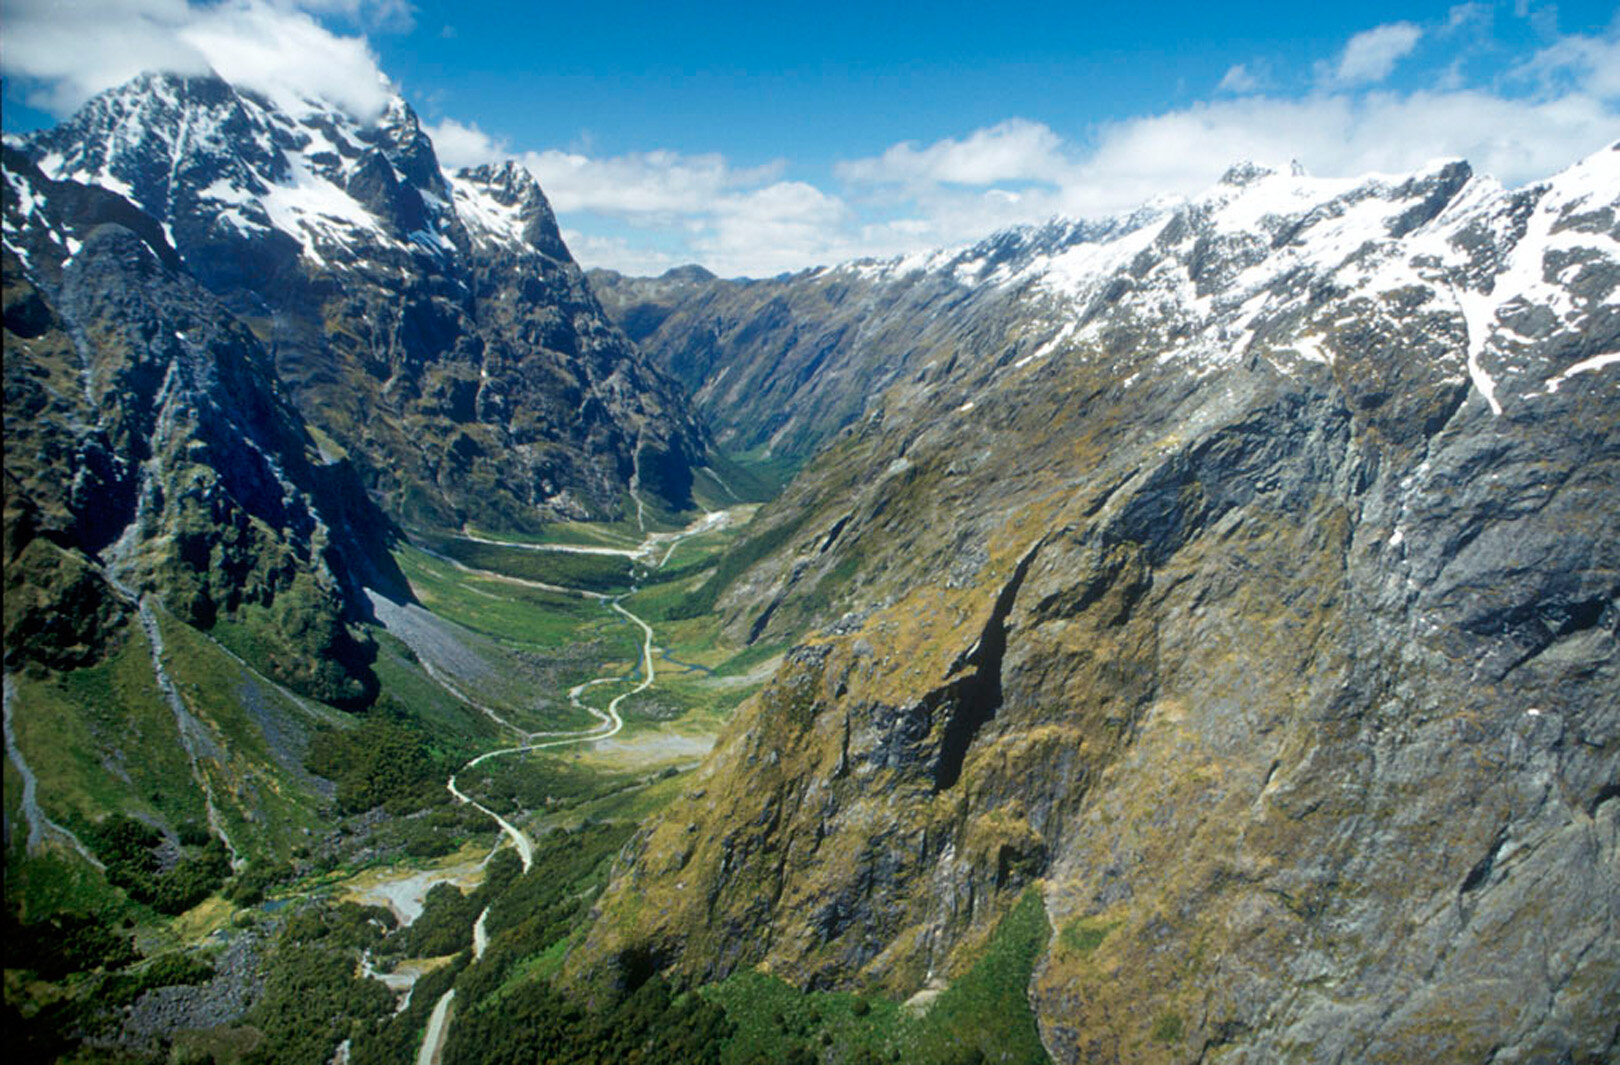 Aerial view of the Milford road